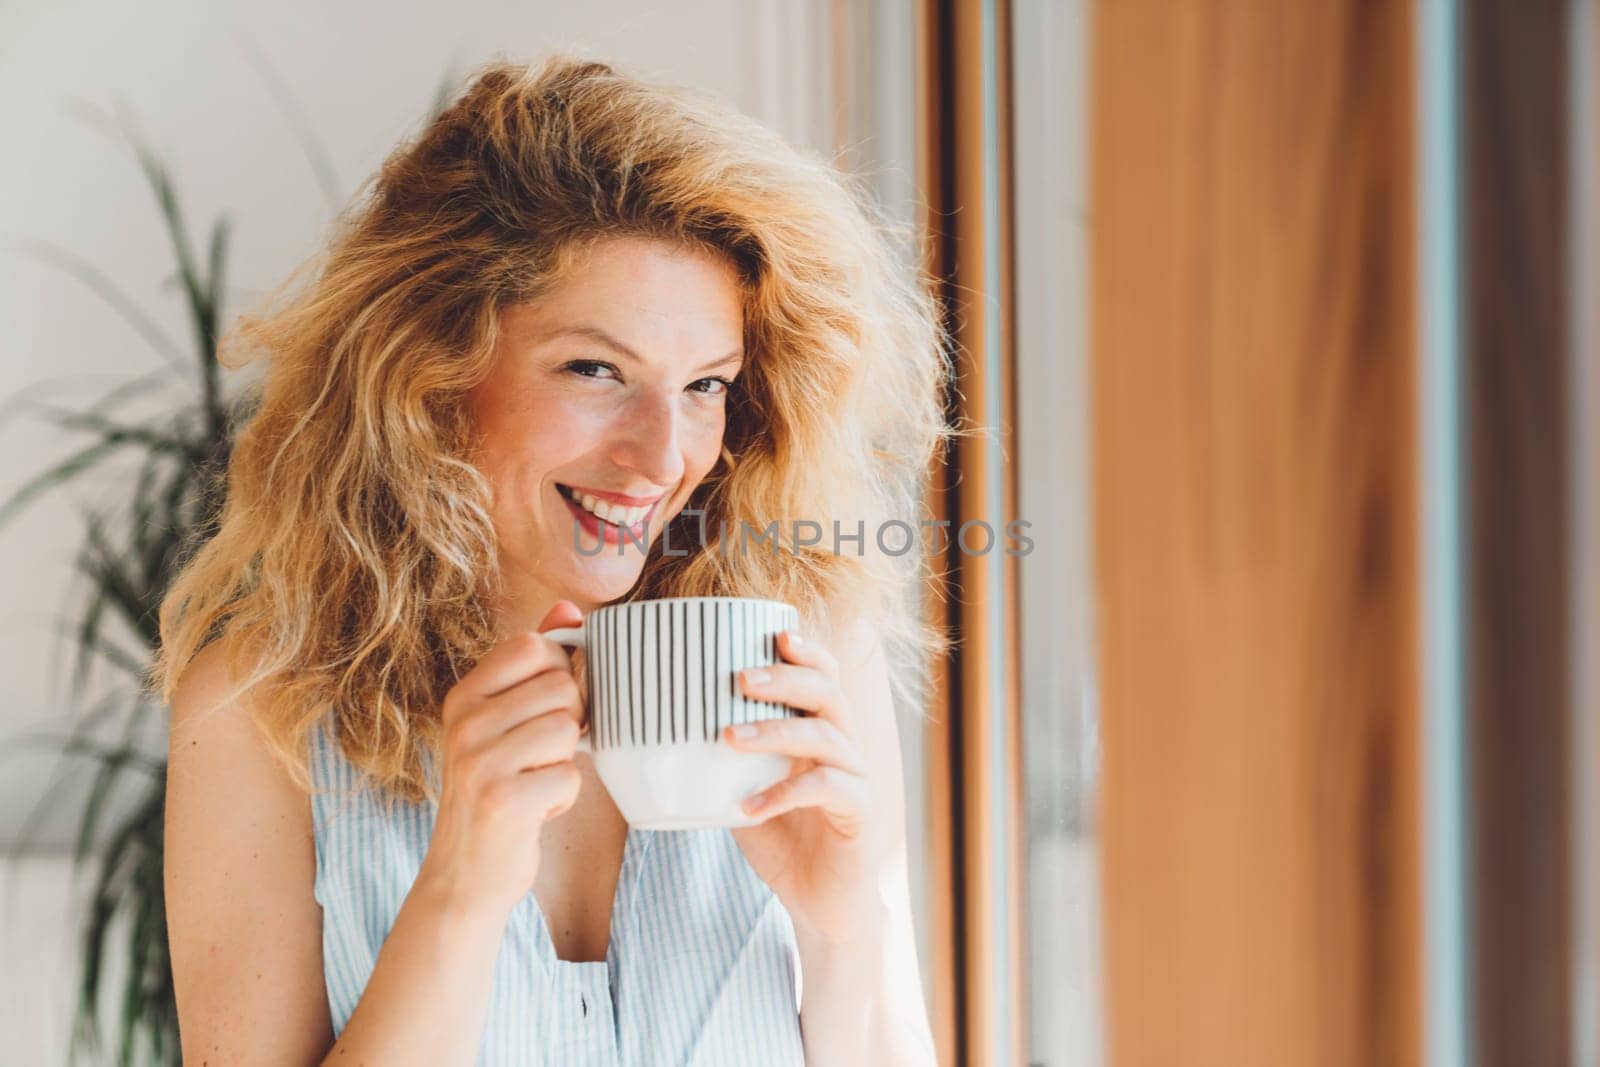 Waist up portrait of a smiling woman with curly har holding a cup of tea standing by the window looking at the camera by VisualProductions